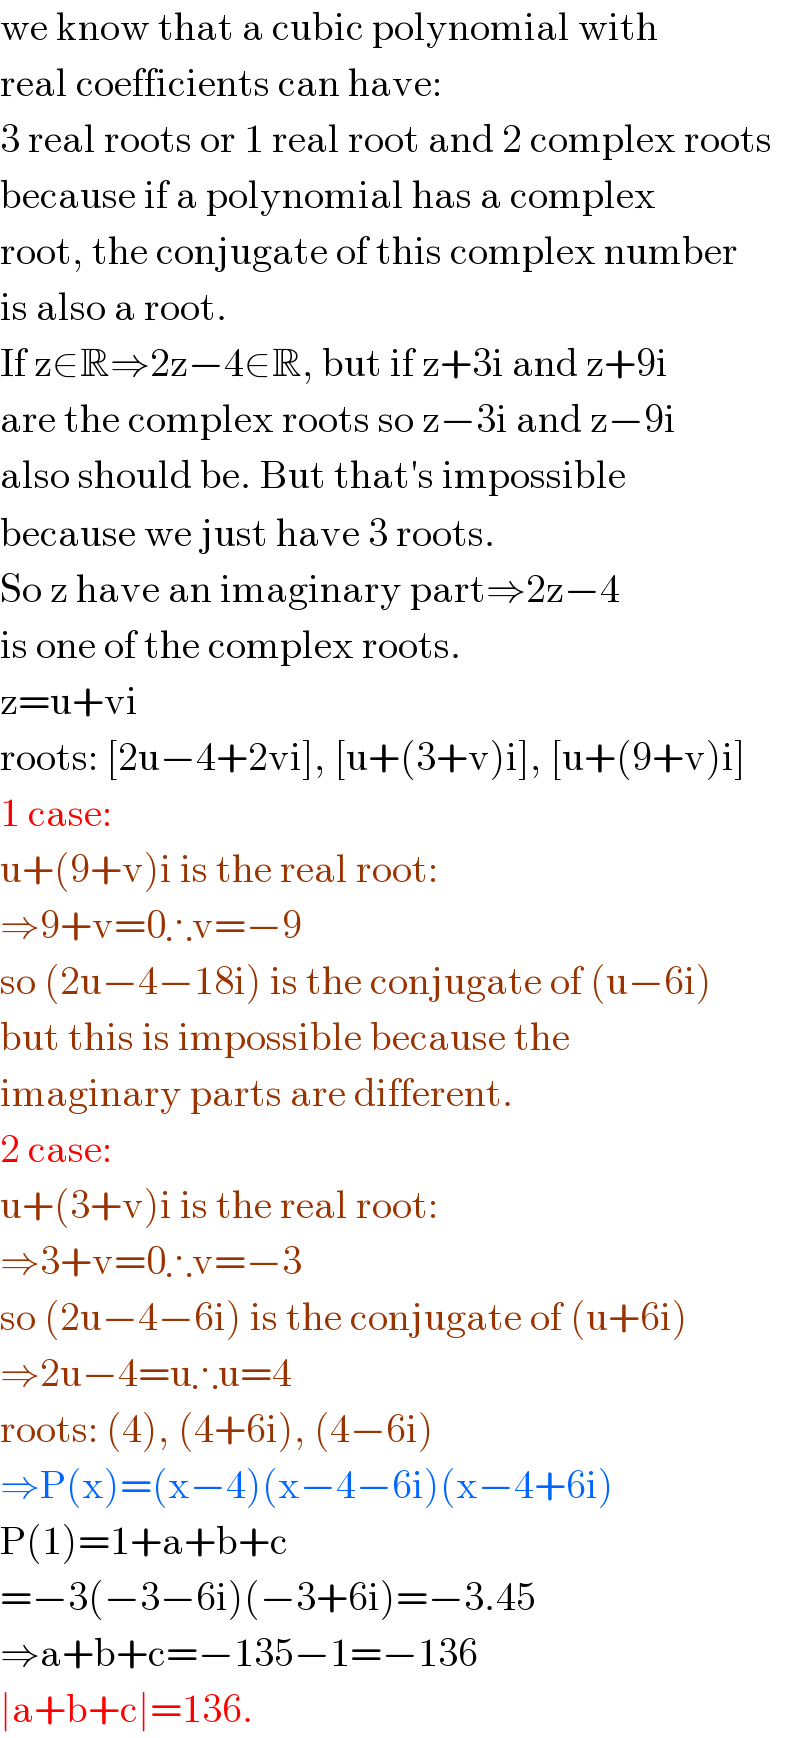 we know that a cubic polynomial with  real coefficients can have:  3 real roots or 1 real root and 2 complex roots  because if a polynomial has a complex   root, the conjugate of this complex number  is also a root.  If z∈R⇒2z−4∈R, but if z+3i and z+9i  are the complex roots so z−3i and z−9i  also should be. But that′s impossible  because we just have 3 roots.  So z have an imaginary part⇒2z−4  is one of the complex roots.  z=u+vi  roots: [2u−4+2vi], [u+(3+v)i], [u+(9+v)i]  1 case:  u+(9+v)i is the real root:  ⇒9+v=0∴v=−9  so (2u−4−18i) is the conjugate of (u−6i)  but this is impossible because the  imaginary parts are different.  2 case:  u+(3+v)i is the real root:  ⇒3+v=0∴v=−3  so (2u−4−6i) is the conjugate of (u+6i)  ⇒2u−4=u∴u=4  roots: (4), (4+6i), (4−6i)  ⇒P(x)=(x−4)(x−4−6i)(x−4+6i)  P(1)=1+a+b+c  =−3(−3−6i)(−3+6i)=−3.45  ⇒a+b+c=−135−1=−136  ∣a+b+c∣=136.  